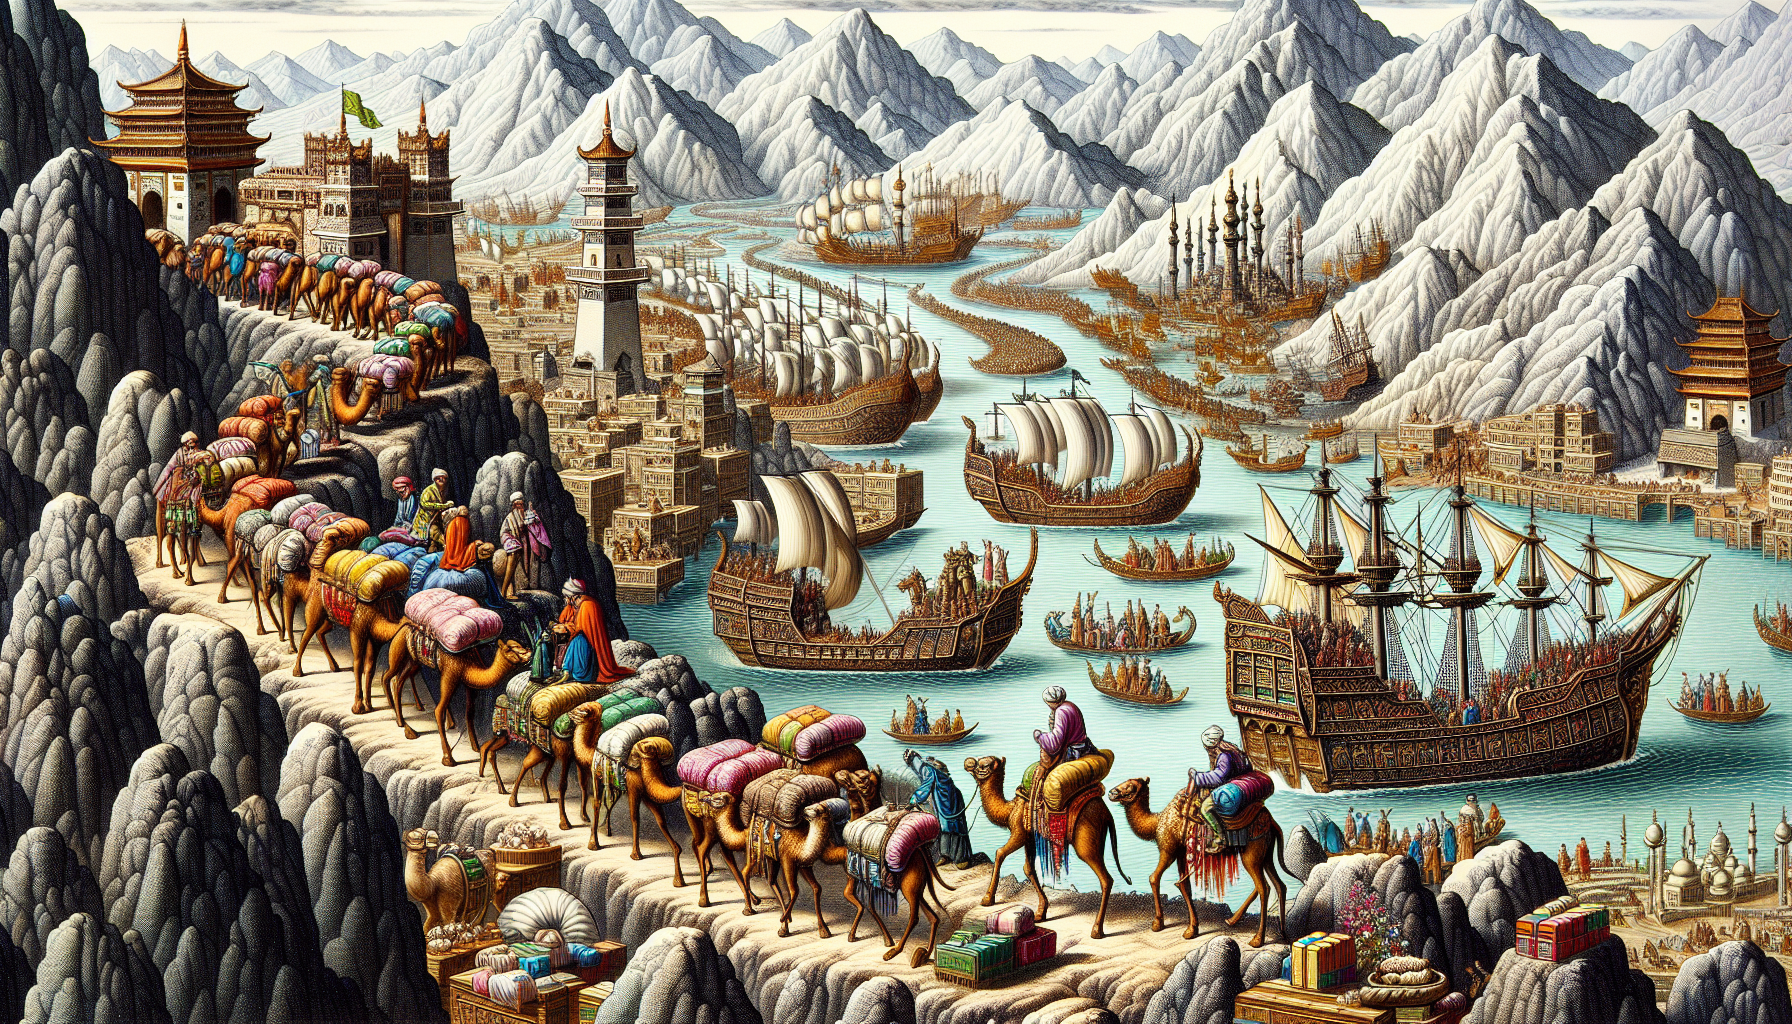 Illustration of bustling trade routes and commerce facilitated by the Mongol Empire